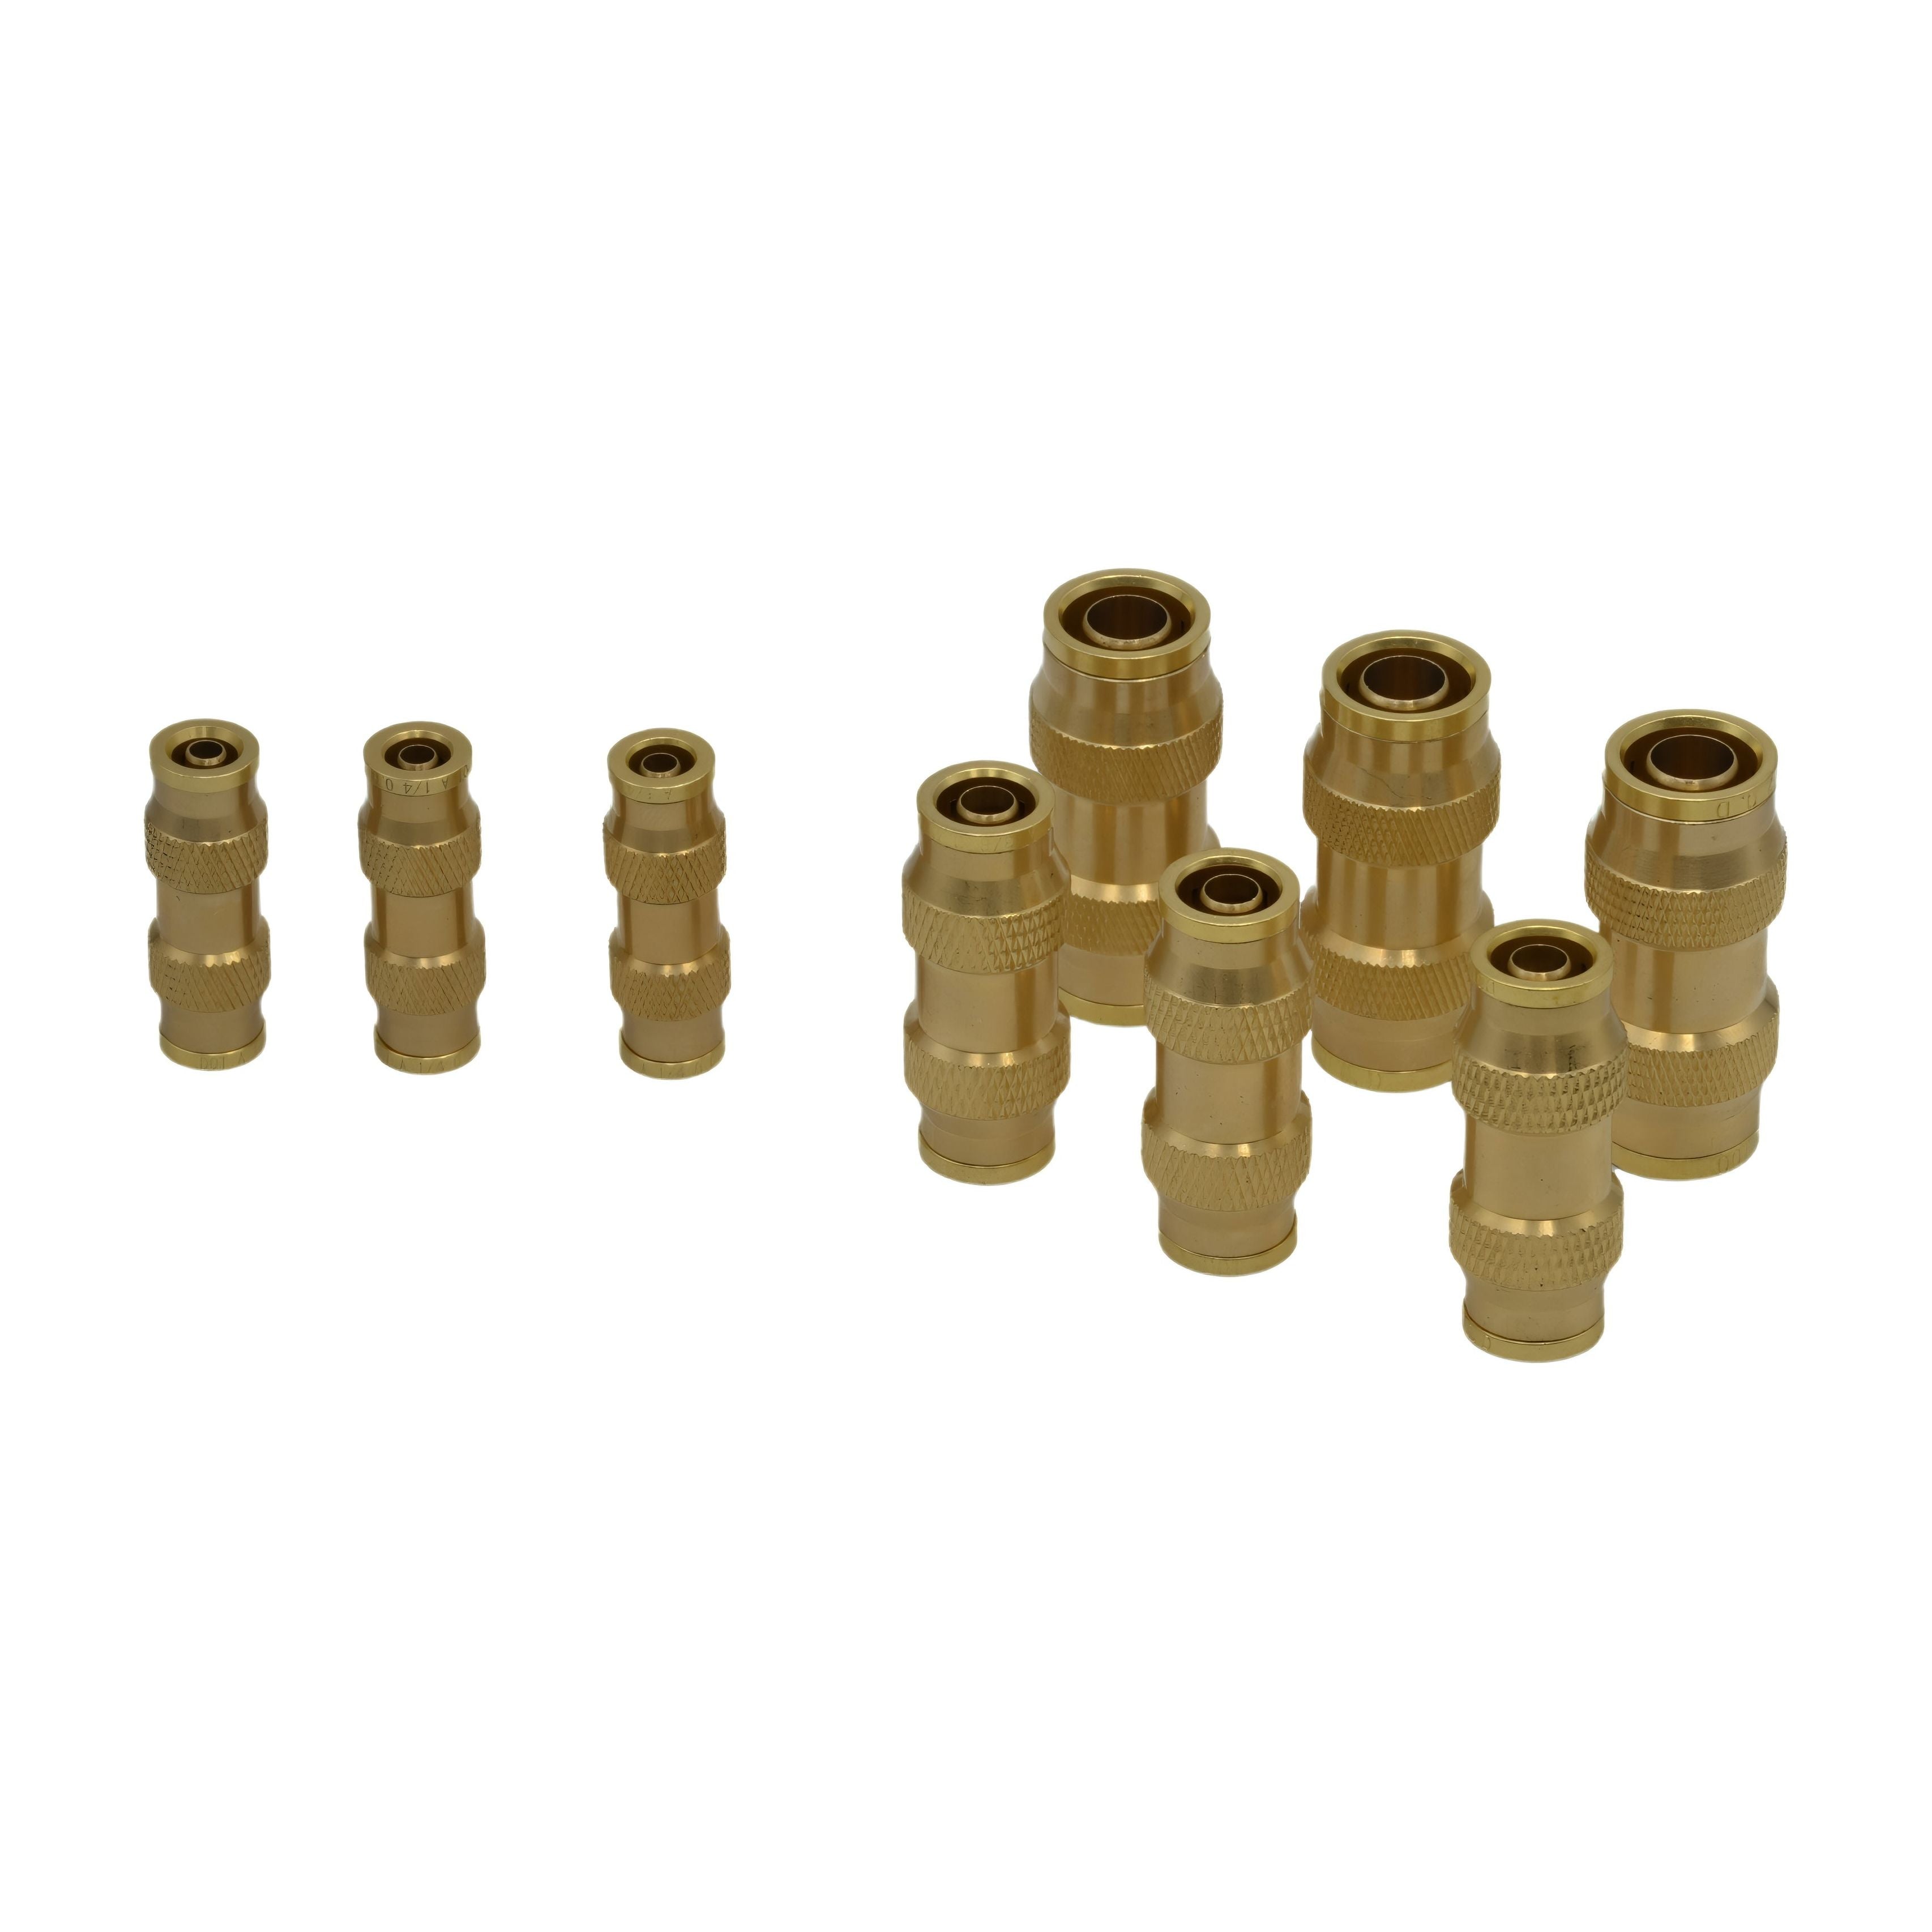 9 Piece  DOT Straight Brass Push in Hose Connect Grab Kit Assortment